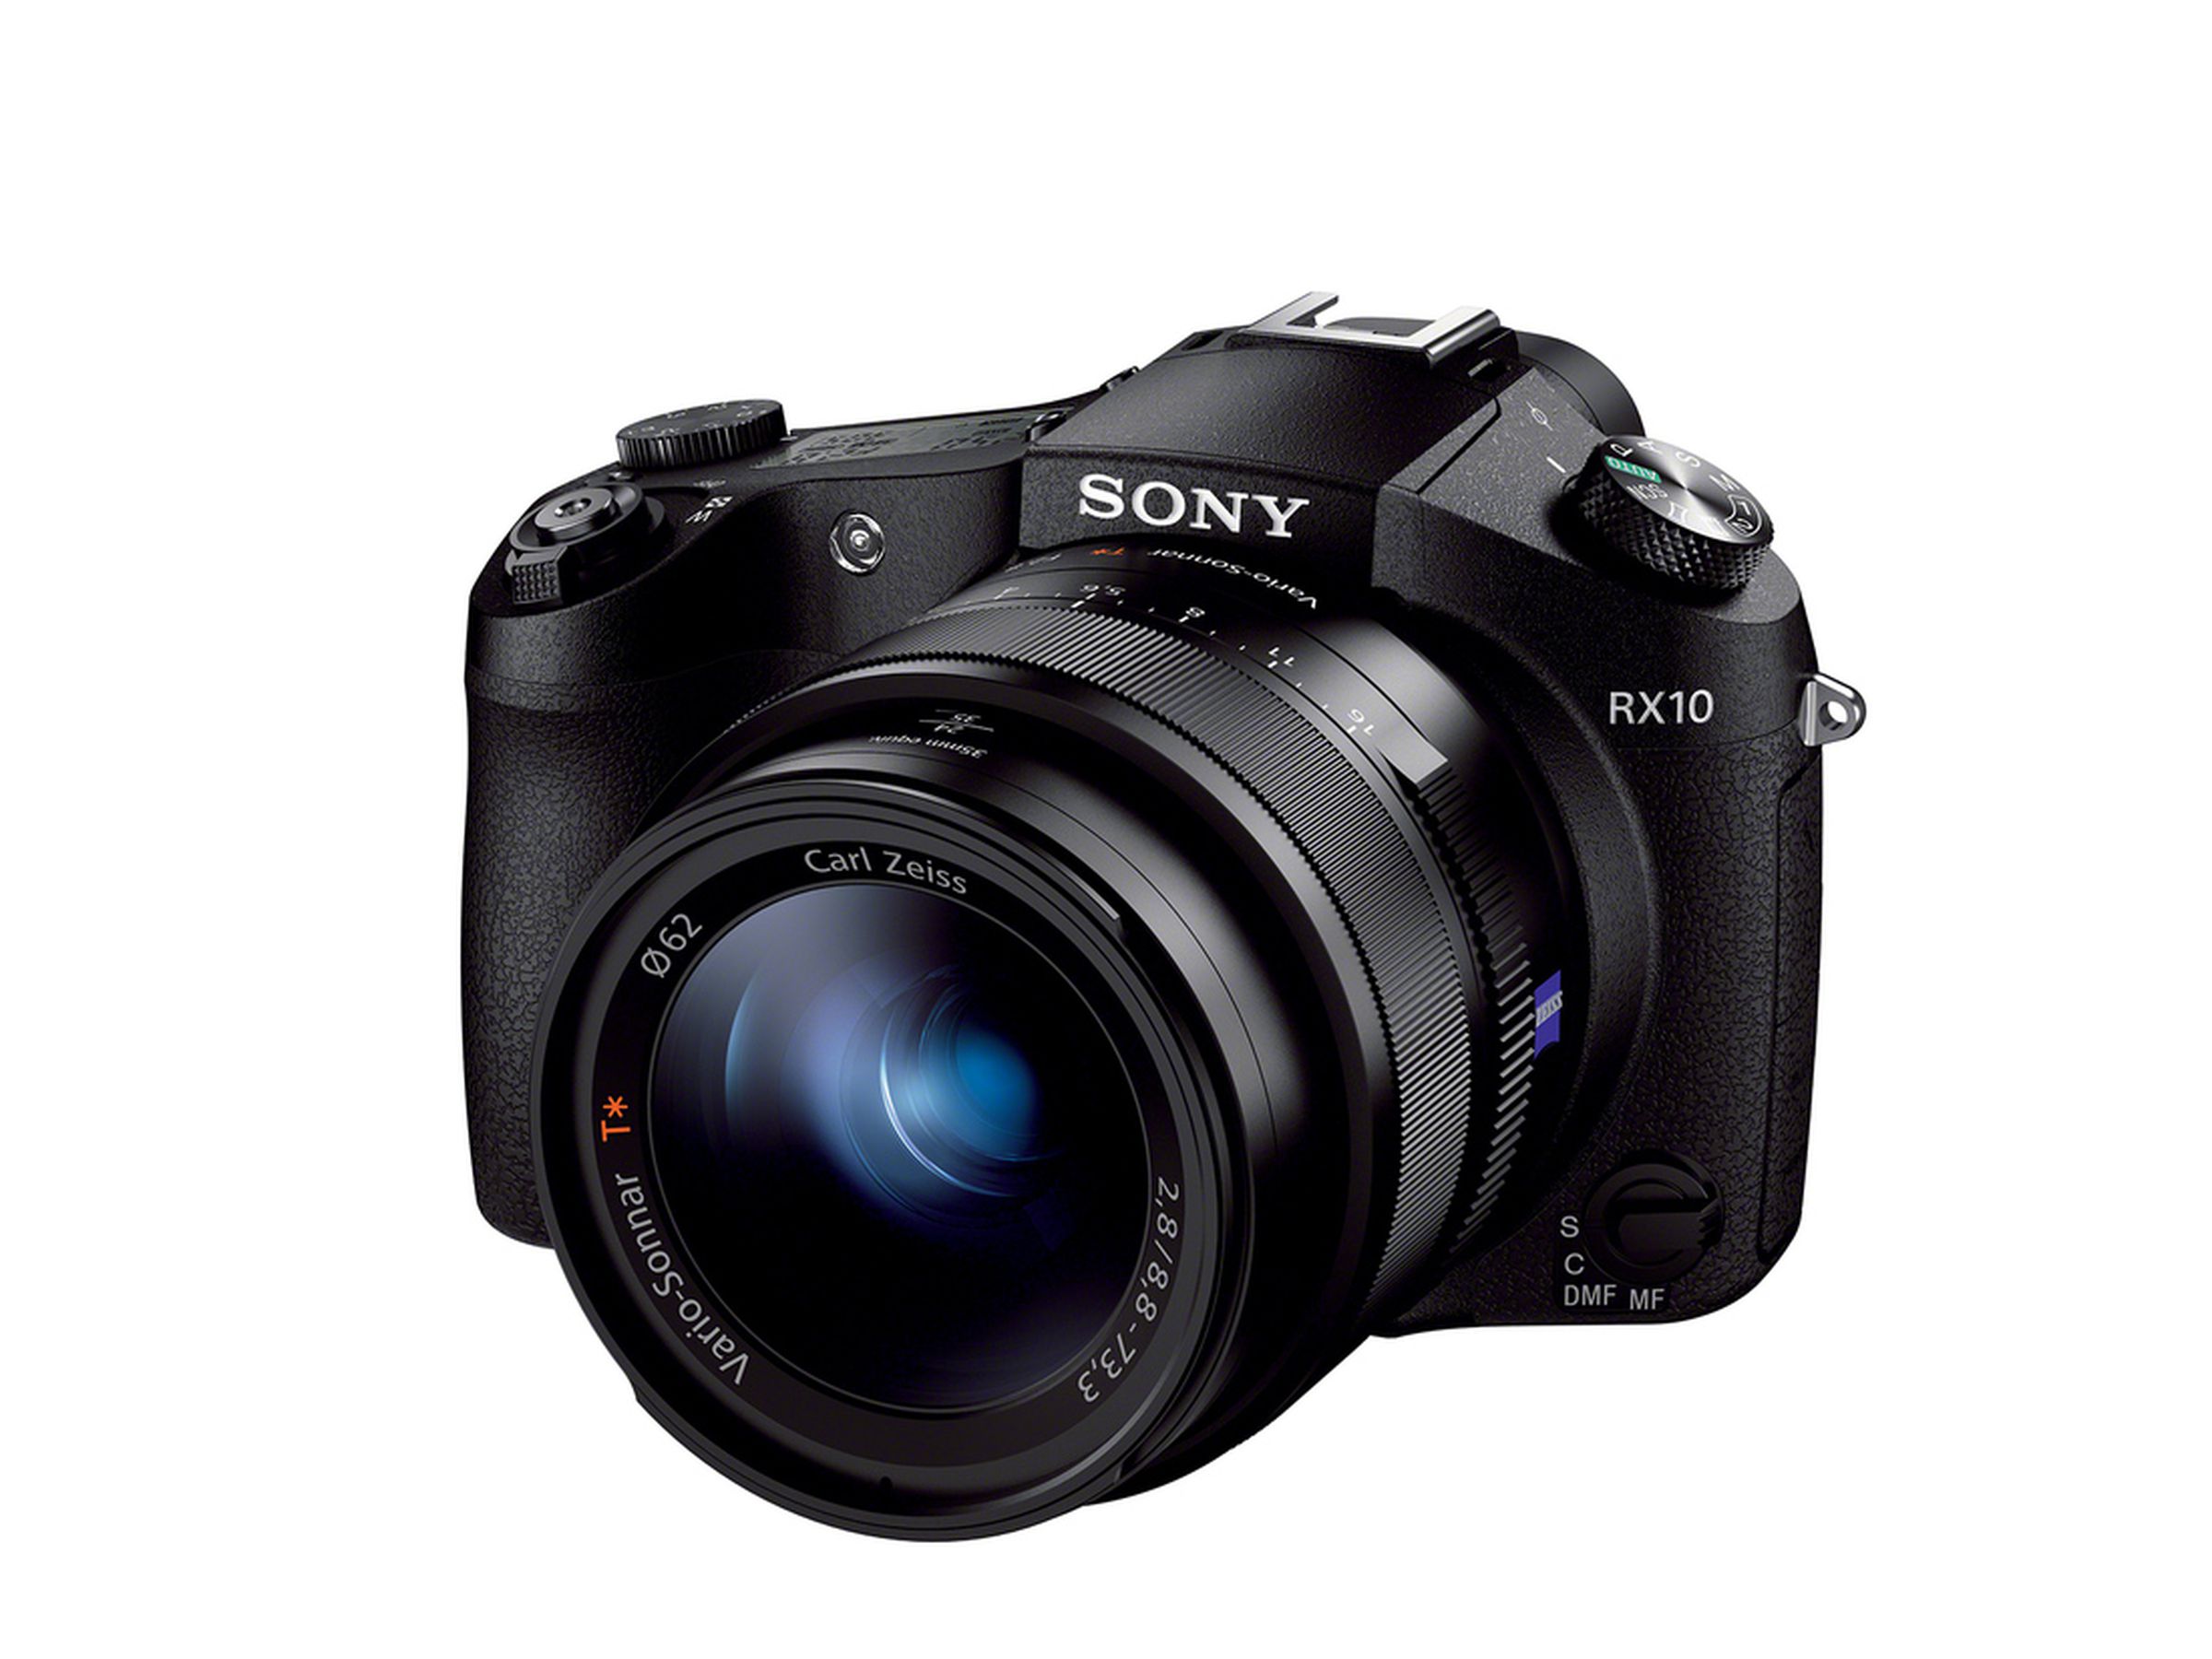 Sony RX10 images